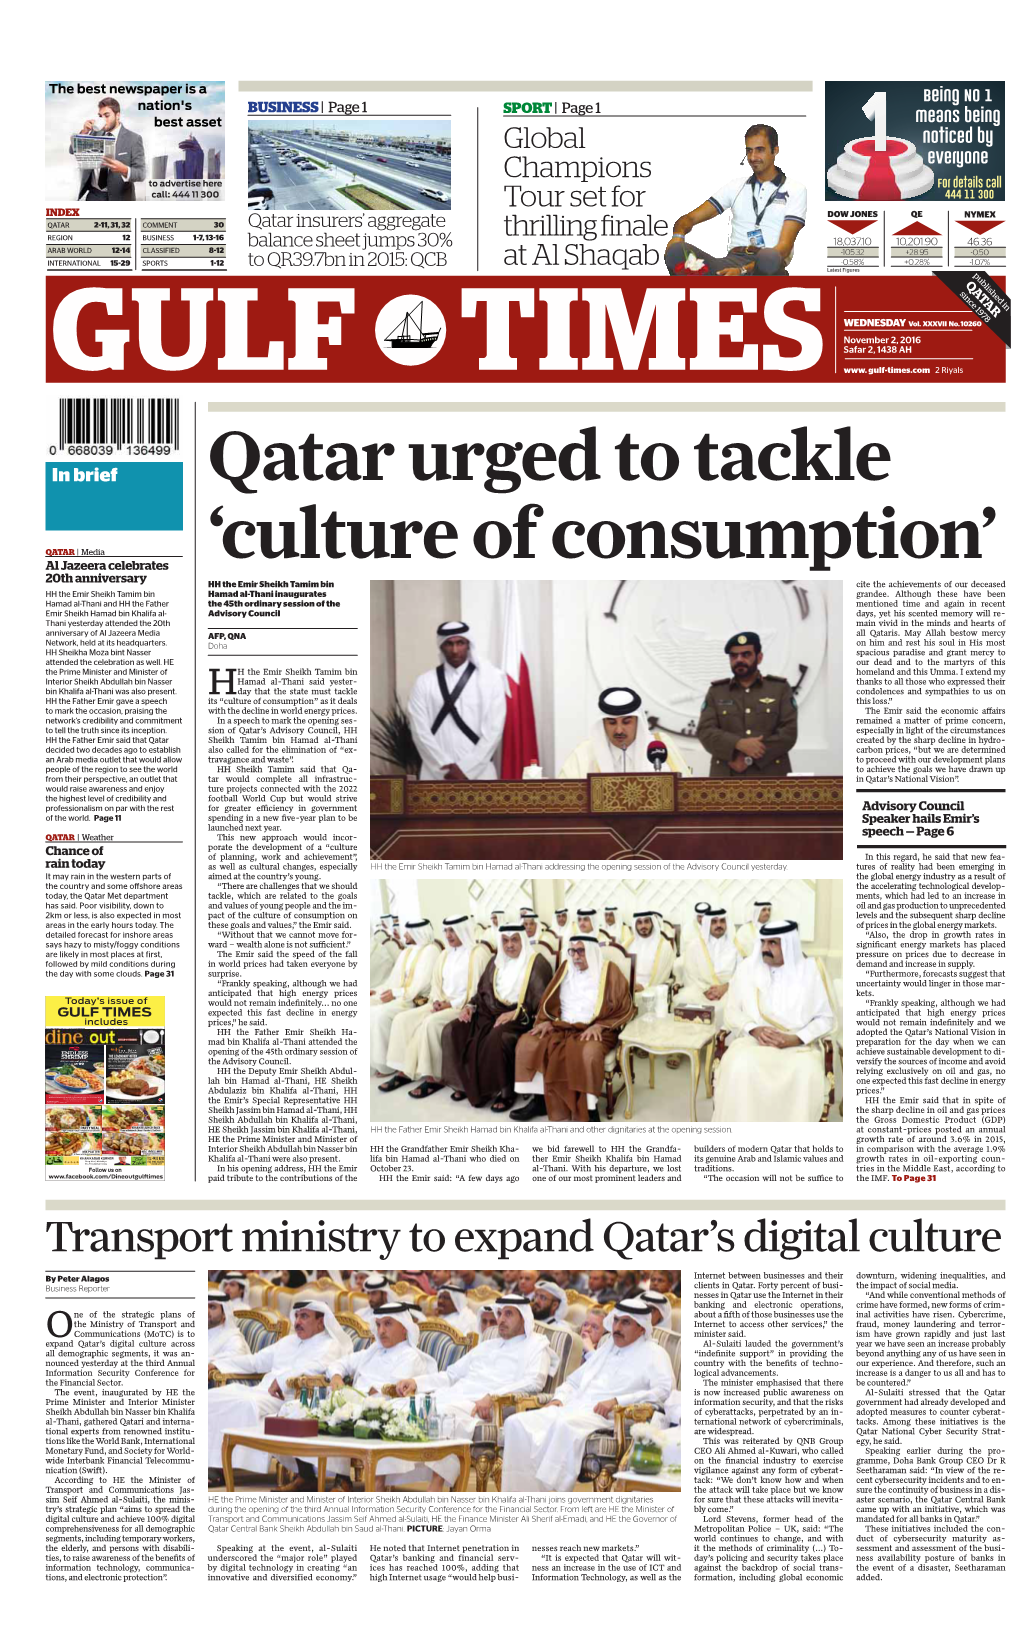 Transport Ministry to Expand Qatar's Digital Culture